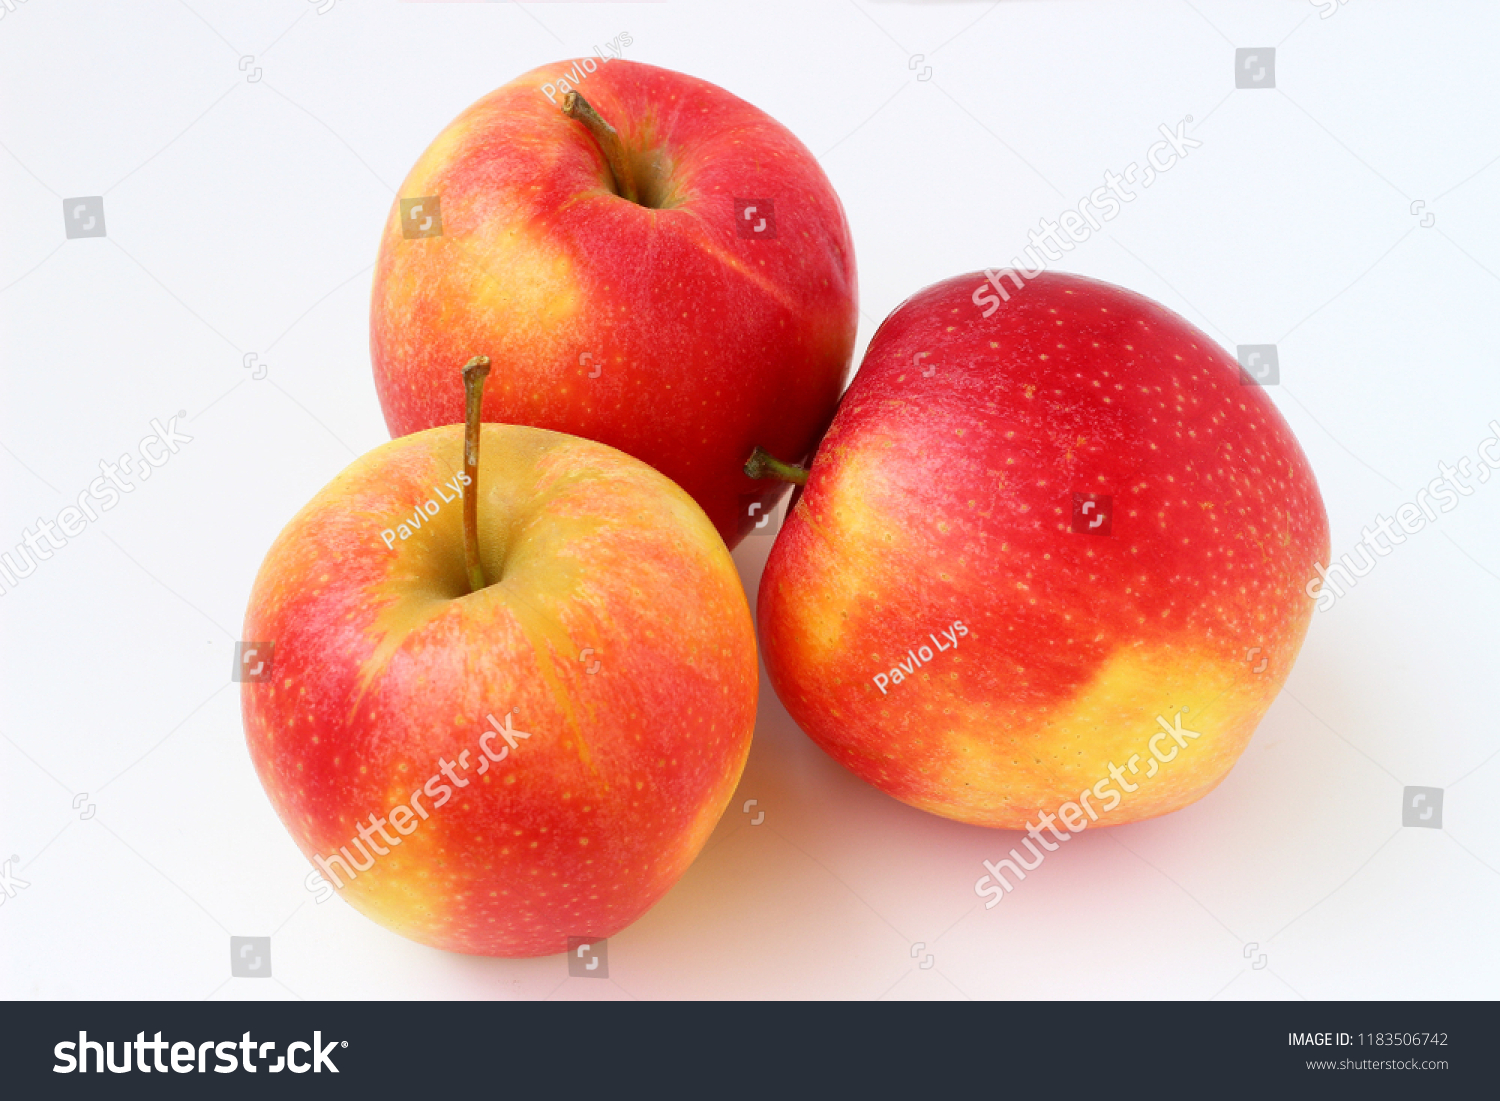 Three red apples on a white background #1183506742